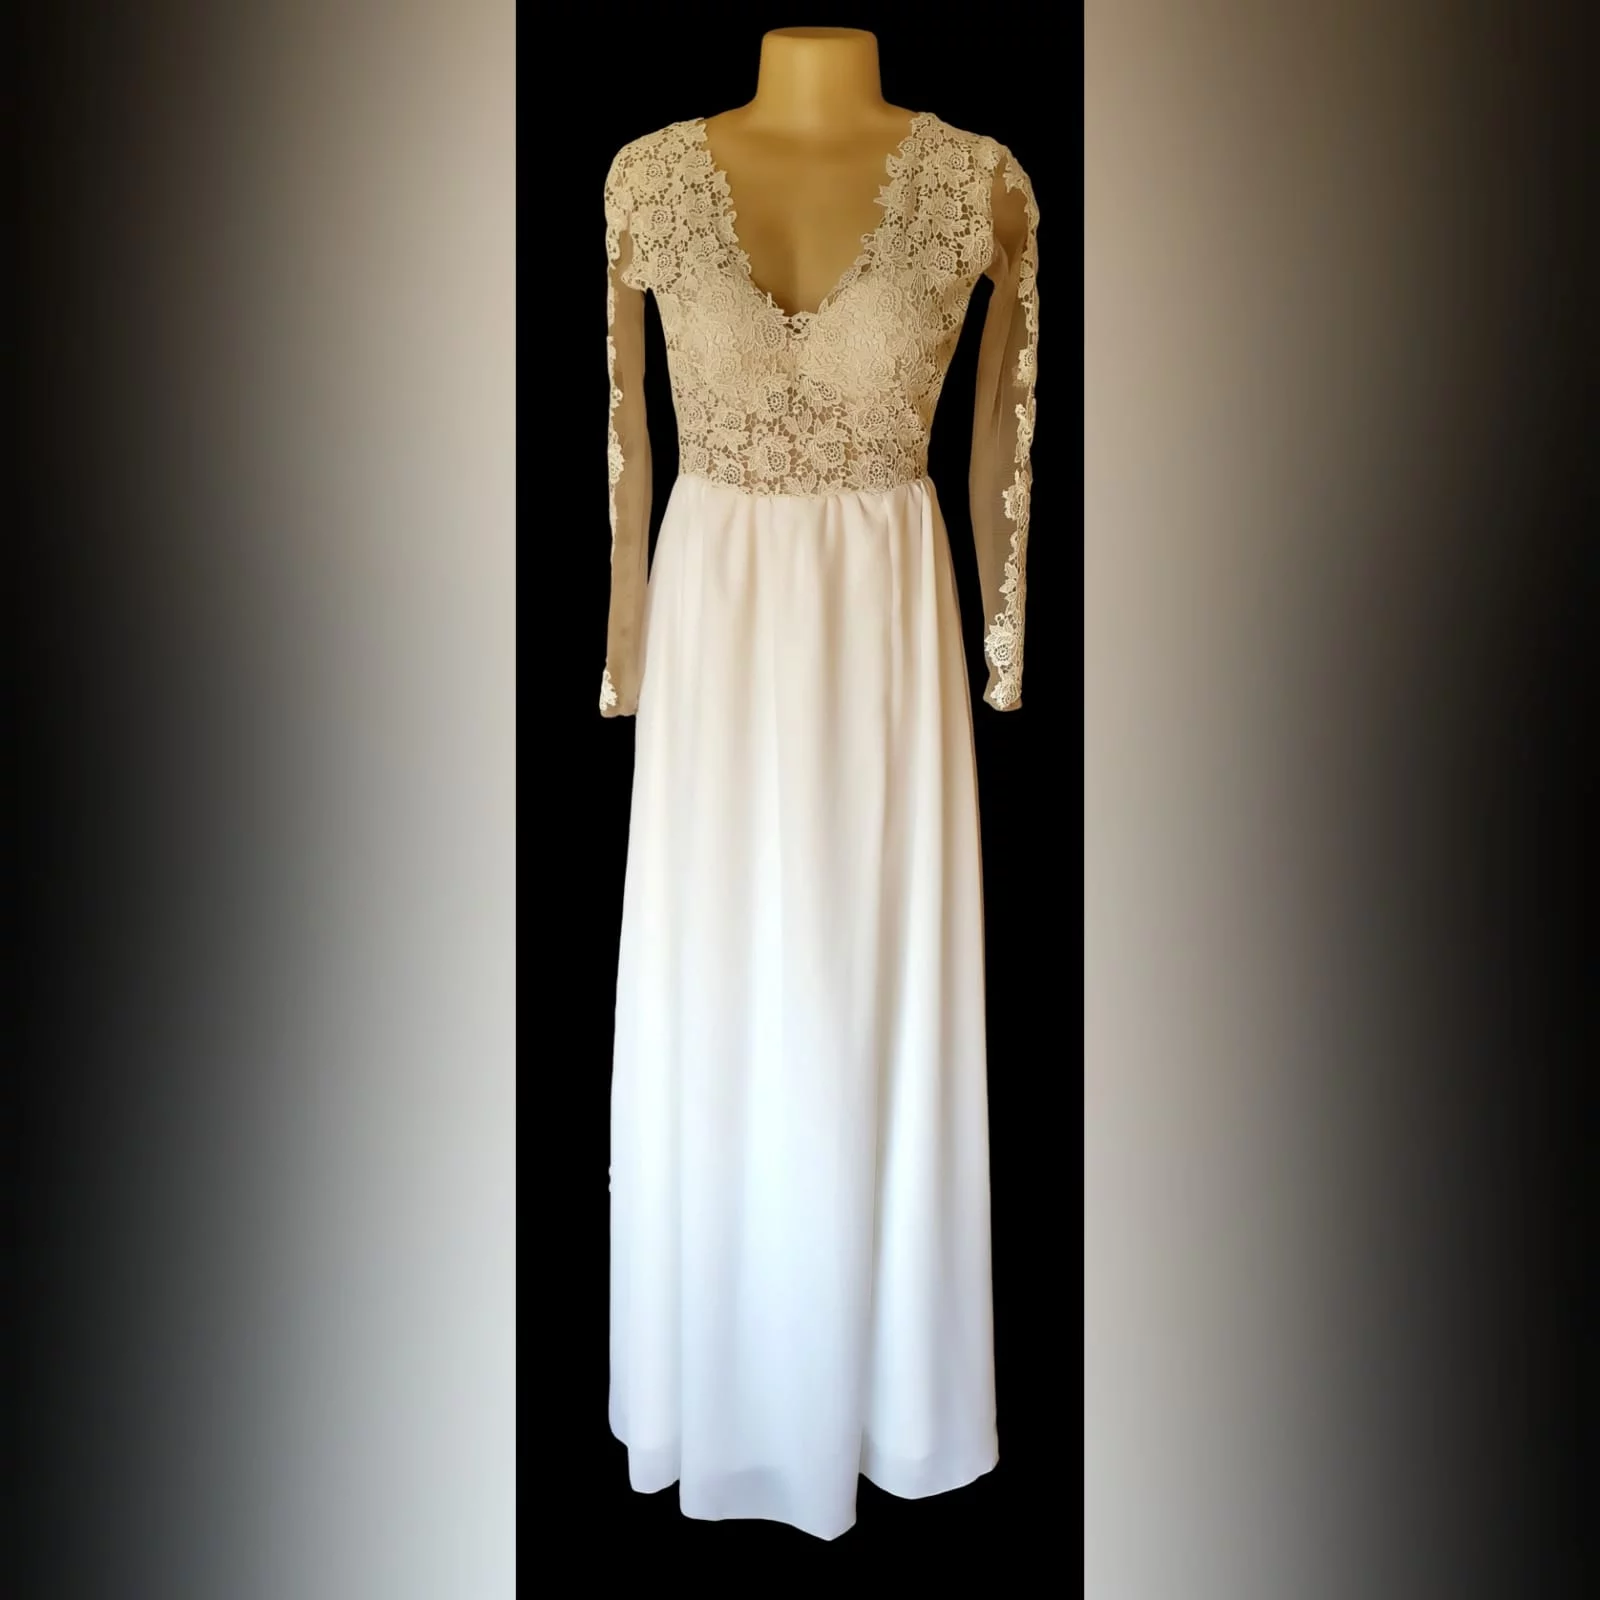 Ivory long chiffon and lace matric farewell dress 2 ivory long chiffon and lace matric farewell dress, with an illusion lace bodice with a rounded open back, long sheer sleeves detailed with lace, and a slit.